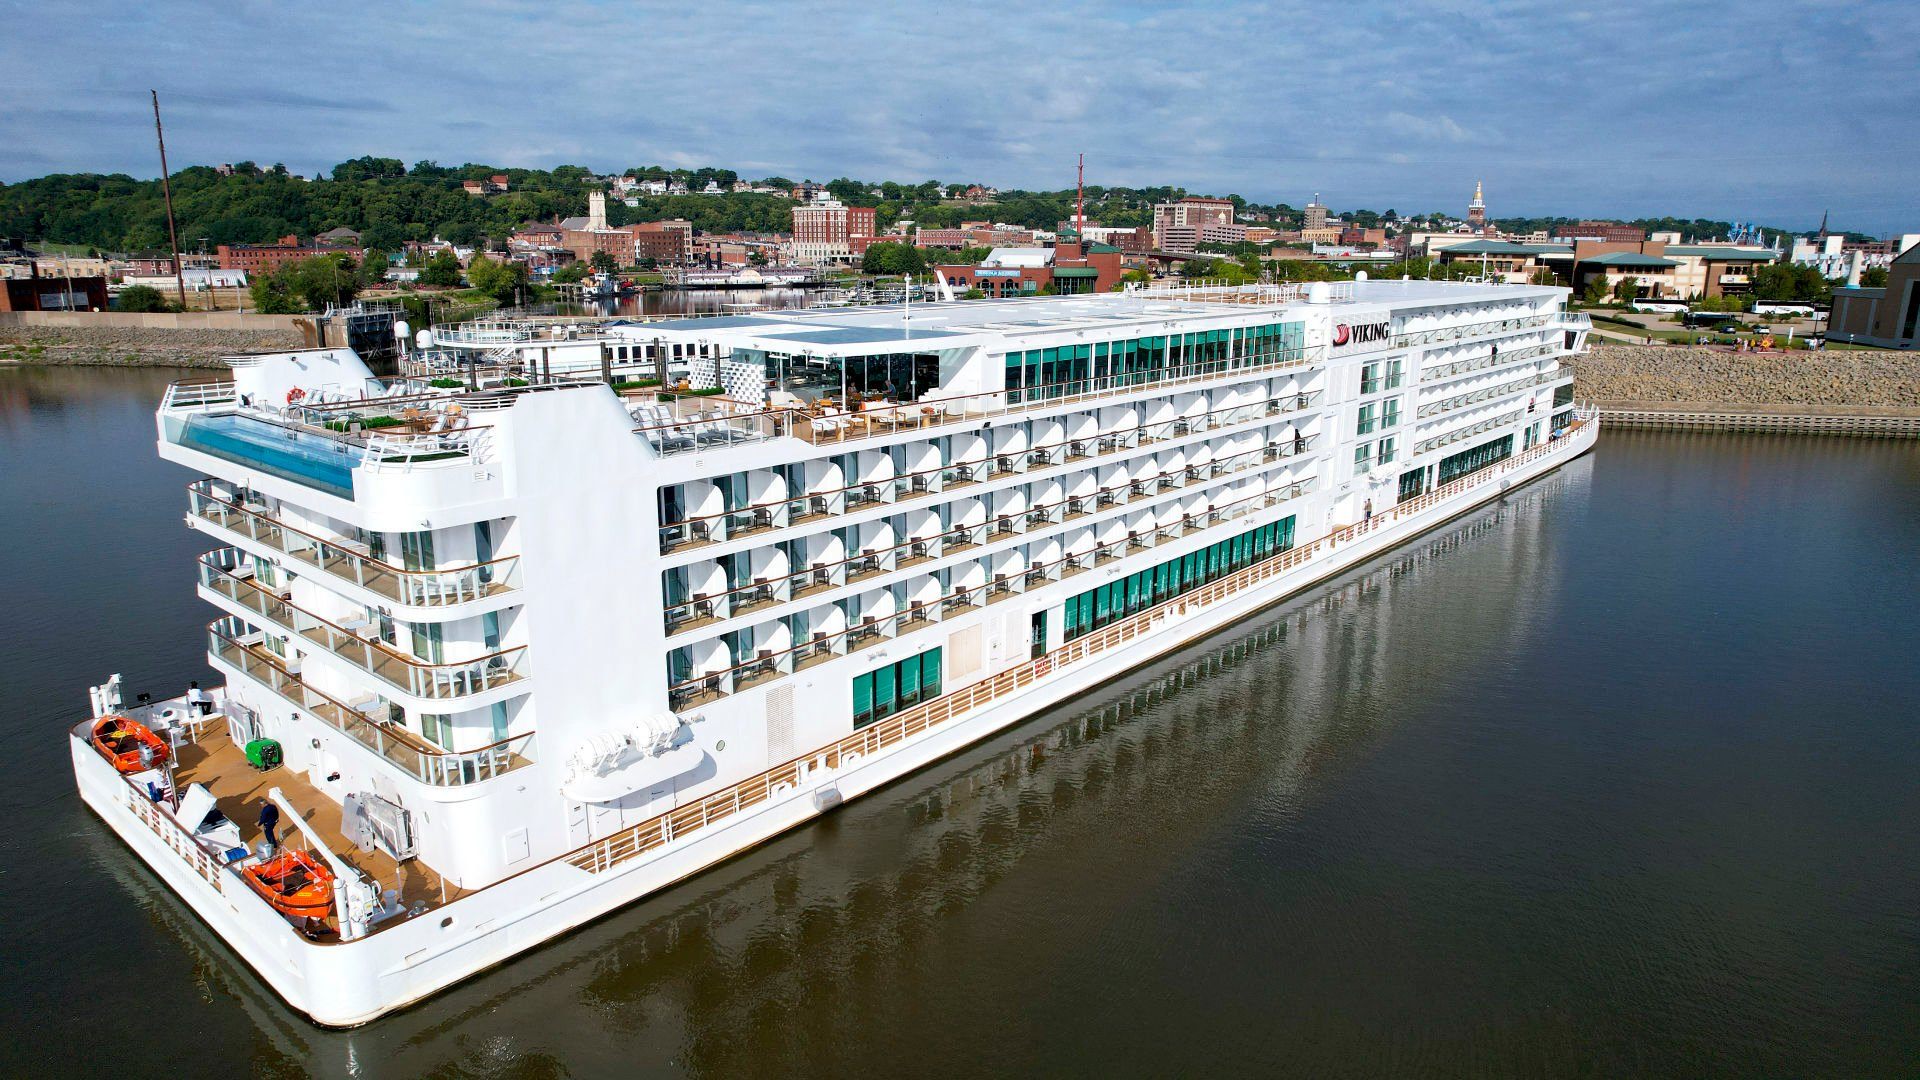 The Viking Mississippi cruise ship docks at the Port of Dubuque on Tuesday, Sept. 6, 2022.    PHOTO CREDIT: Dave Kettering